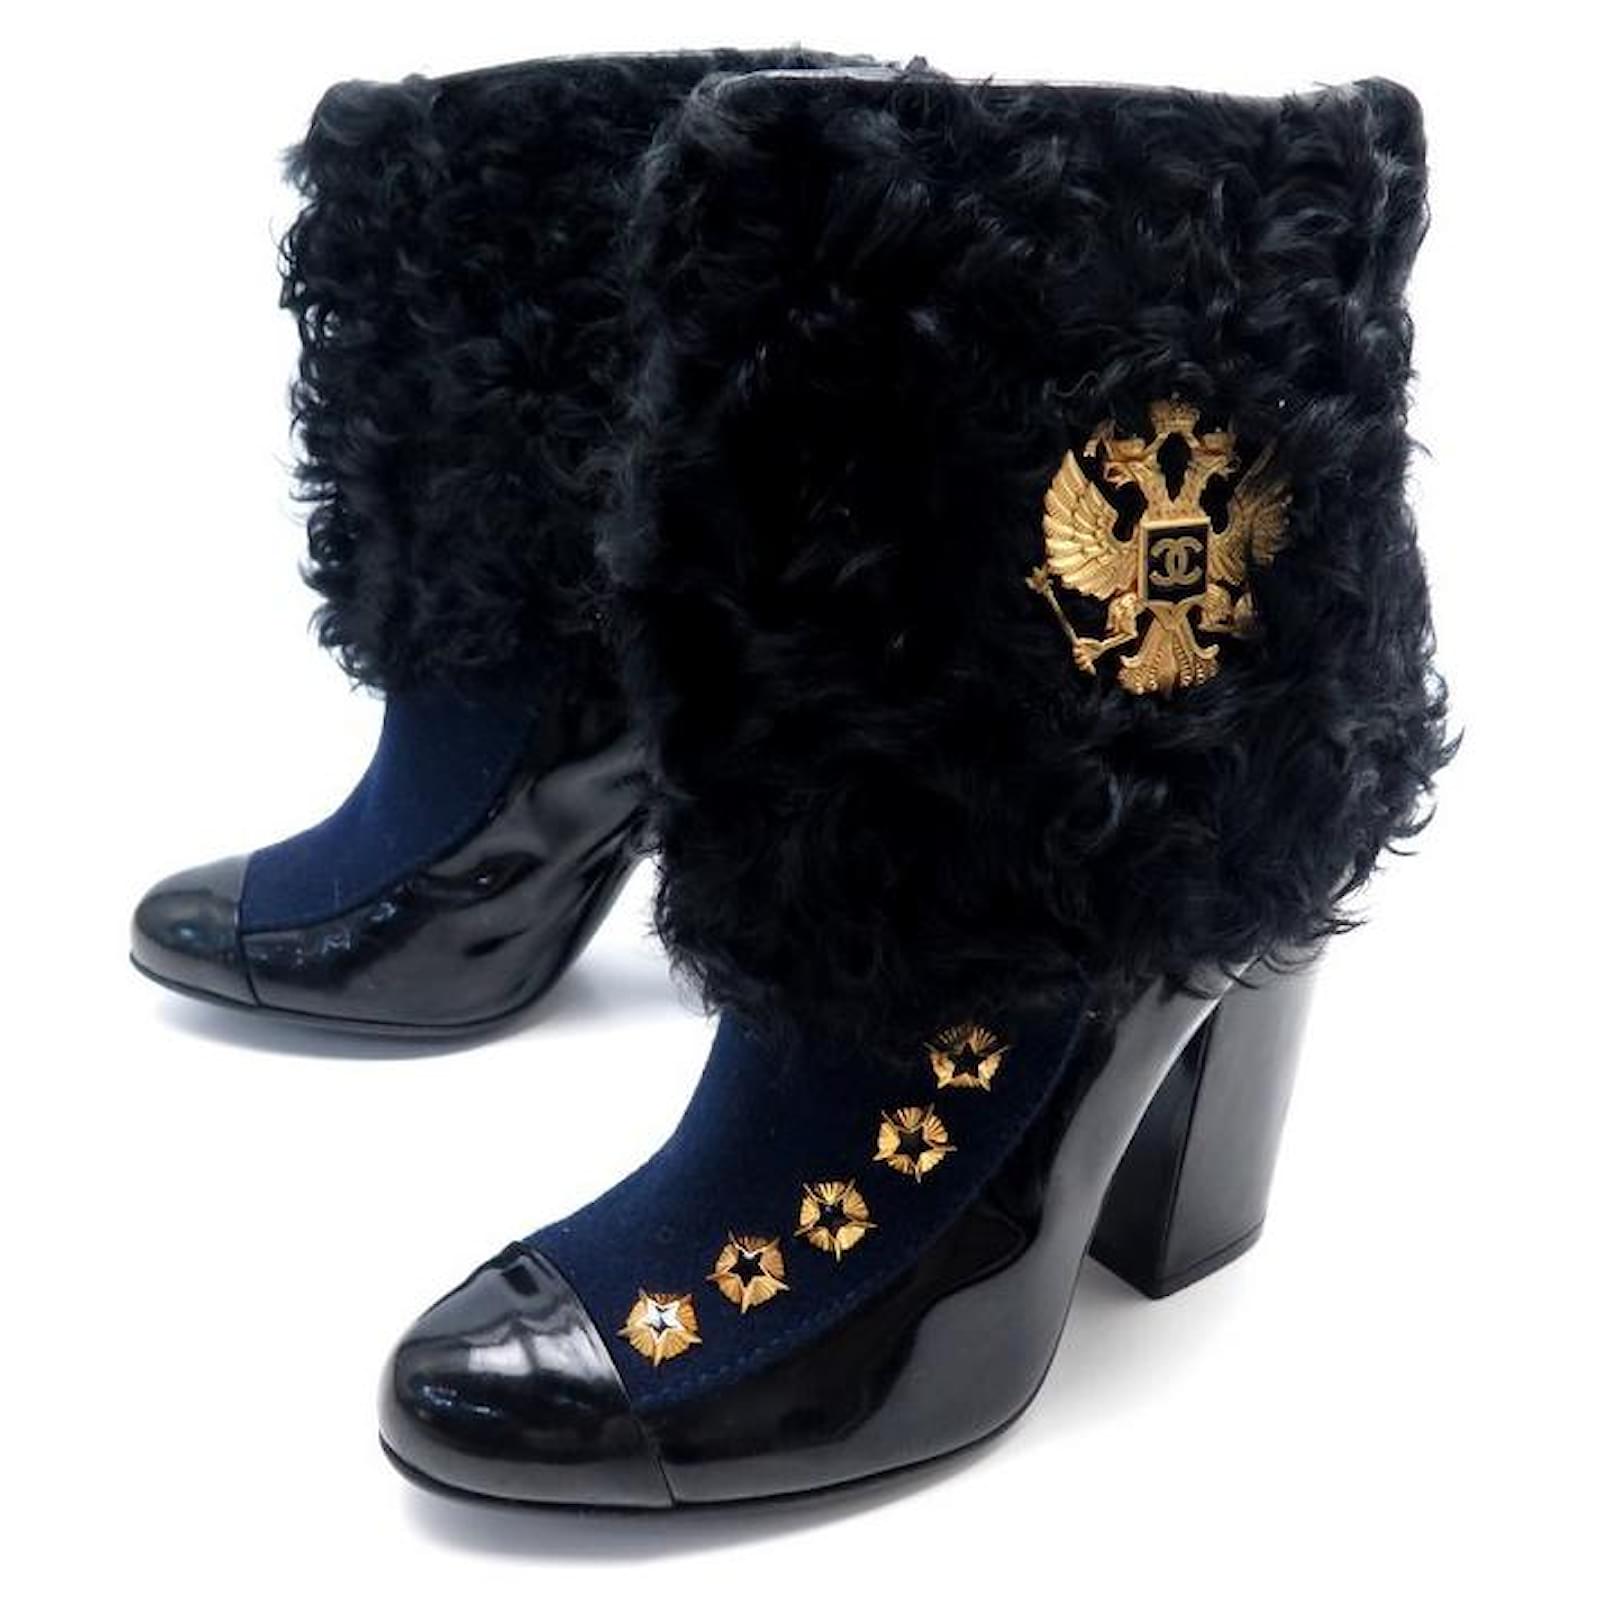 Ankle Boots Chanel Chanel Shoes Paris-Moscow Ankle Boots 38.5 Patent Leather & Fur Boots